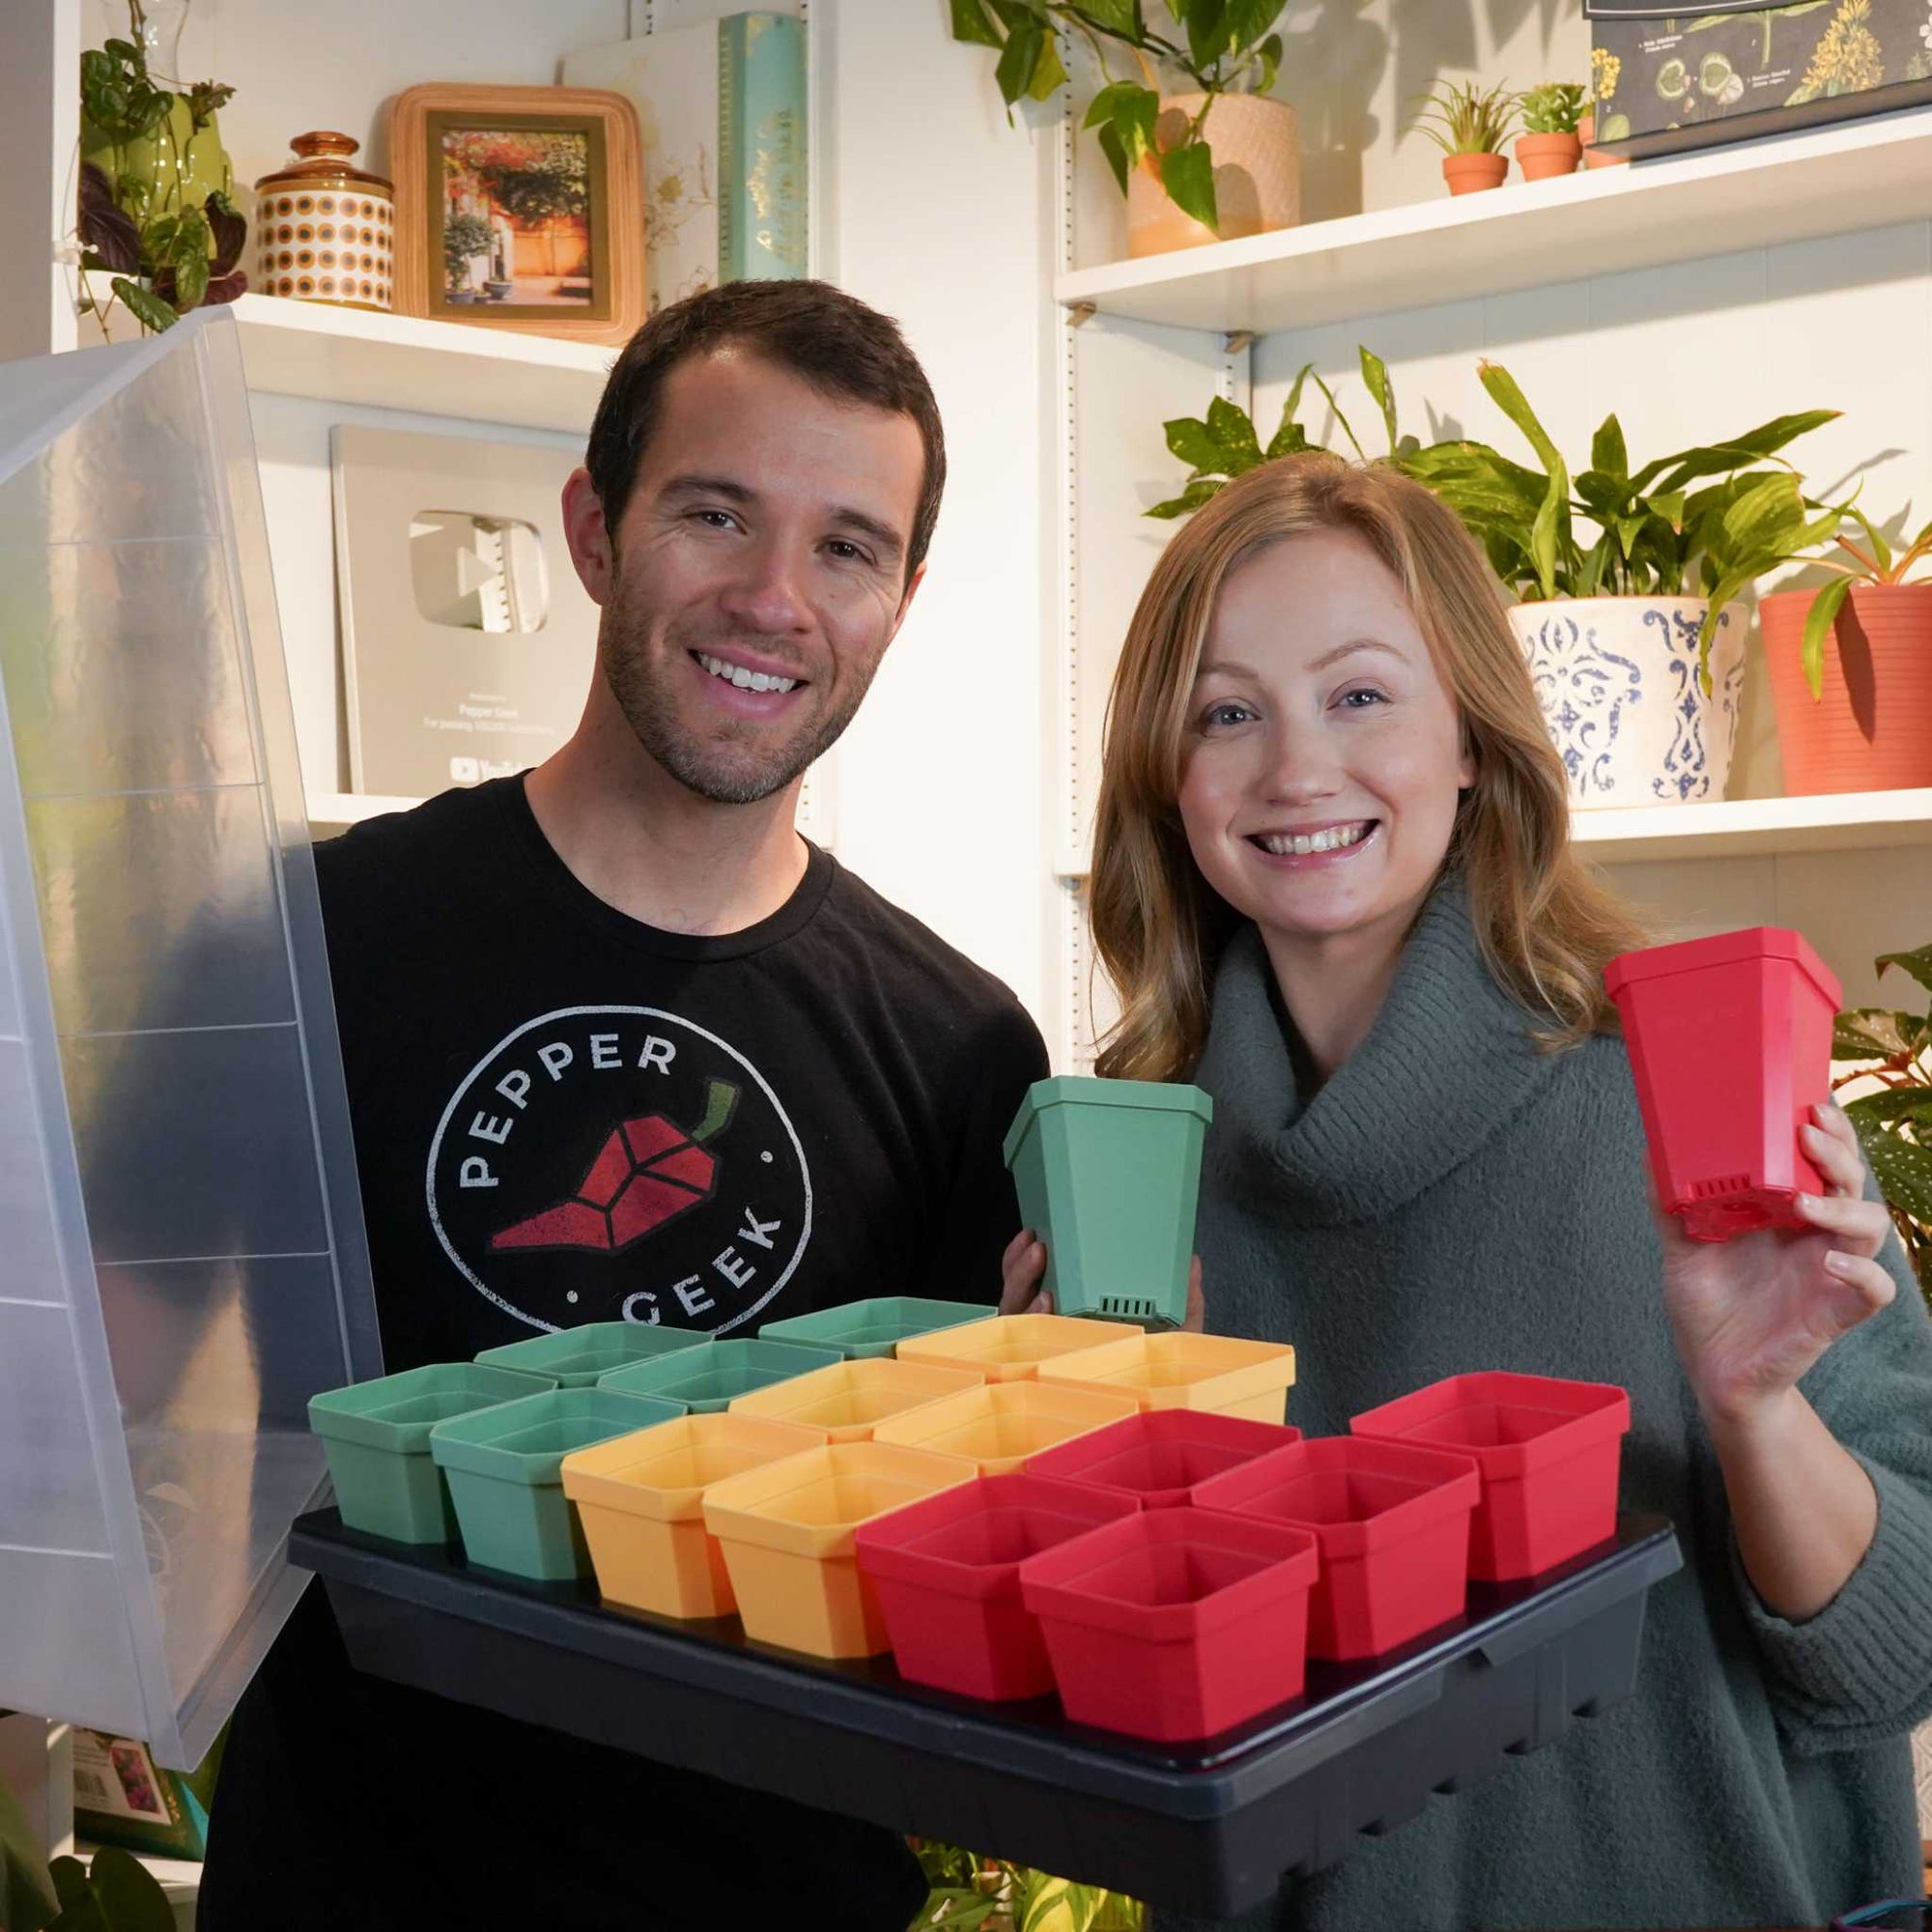 Woman holding a red and a green 3.3 inch pot. She is standing next to a man wearing a Pepper Geek shirt and holding a grey 1020 full of 3 inch pots.